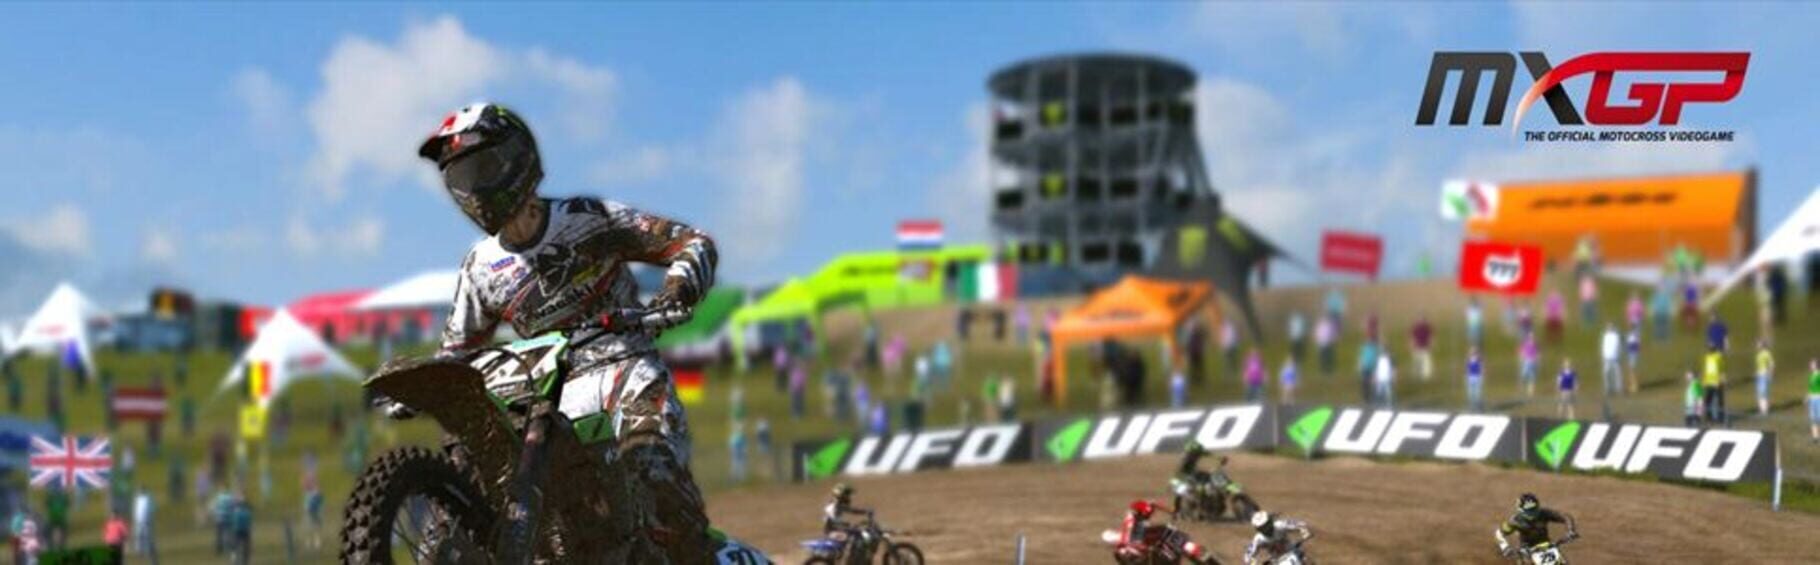 Mxgp the official motocross videogame steam фото 51